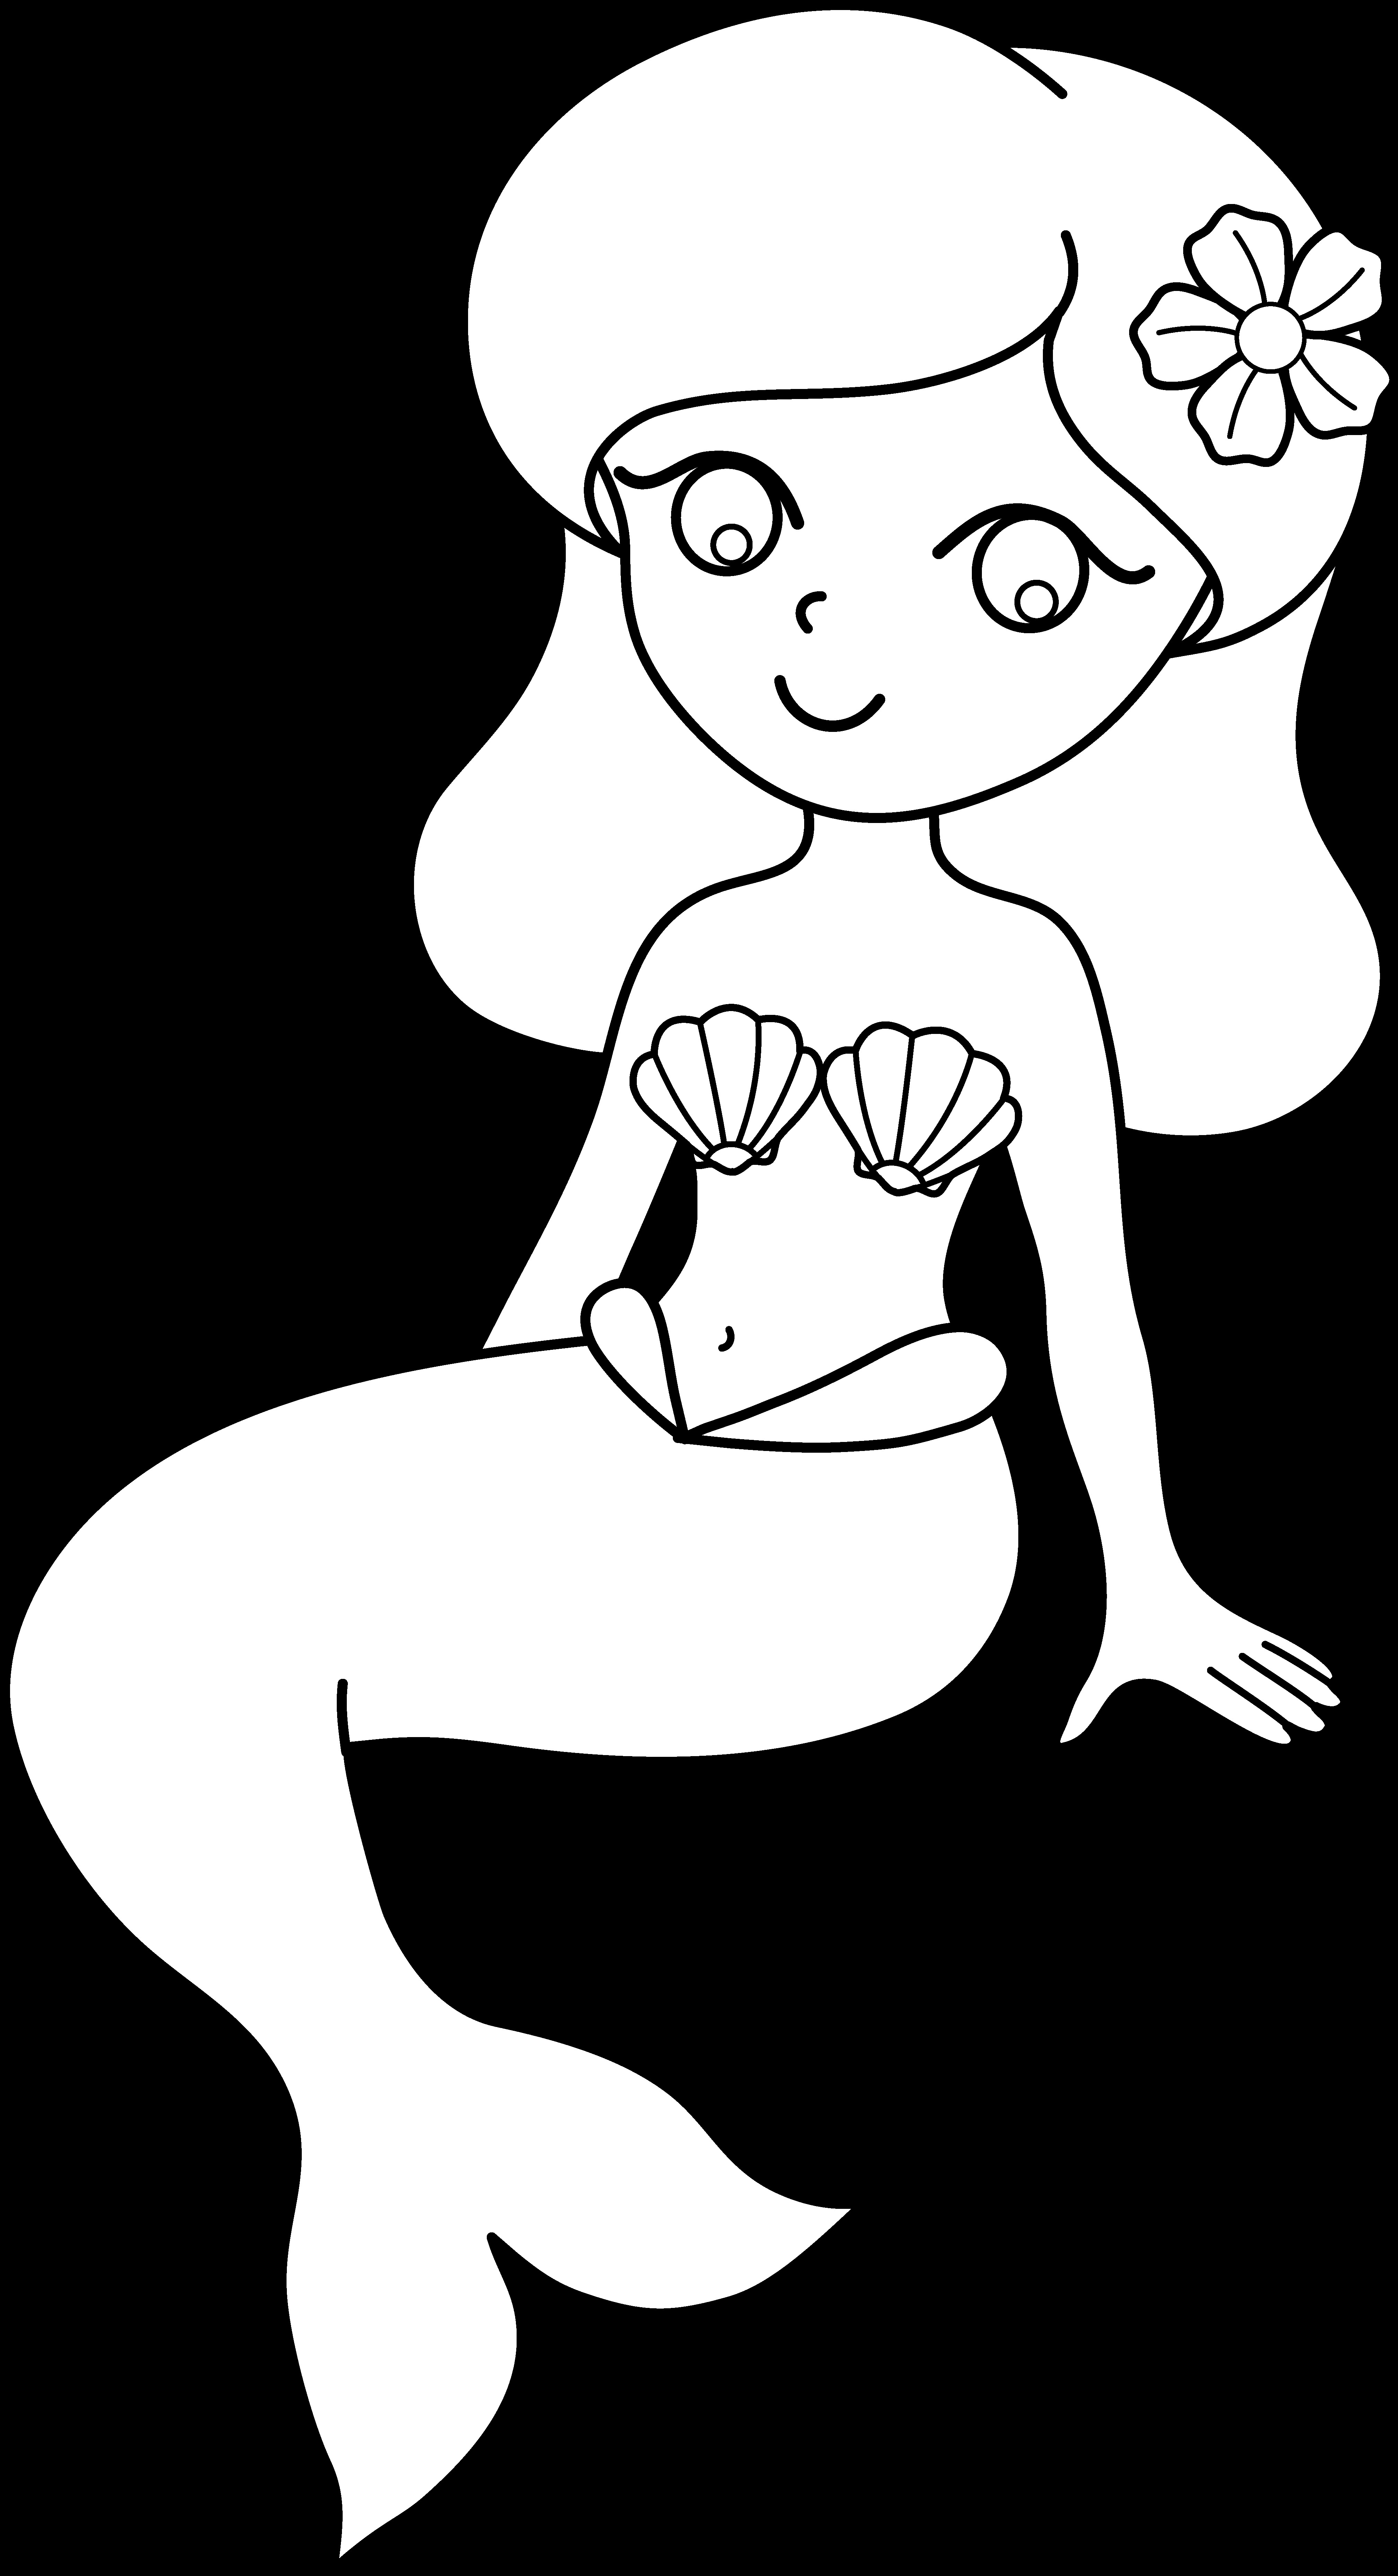 Coloring Pages For Toddlers Mermaid
 Baby Mermaid Coloring Pages Coloring Home